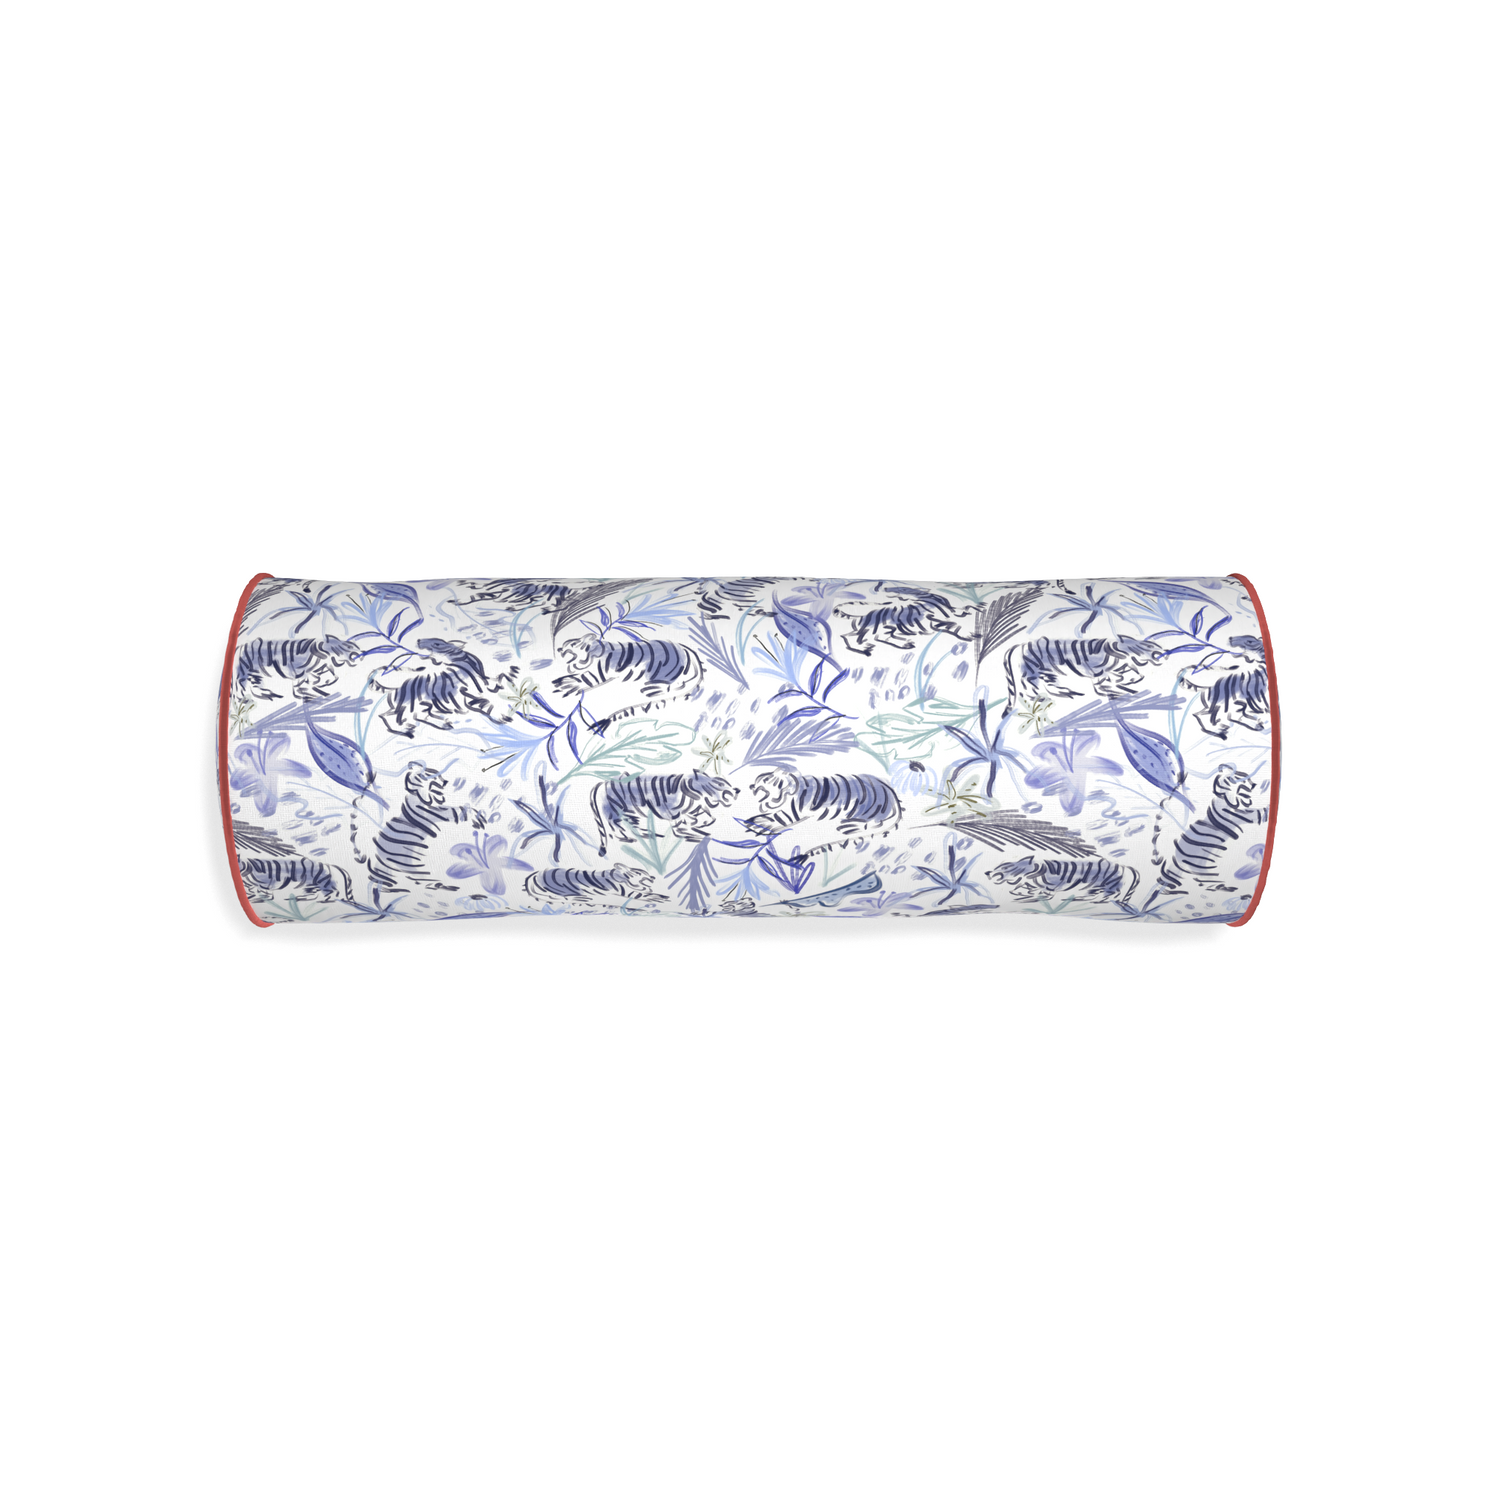 Bolster frida blue custom blue with intricate tiger designpillow with c piping on white background